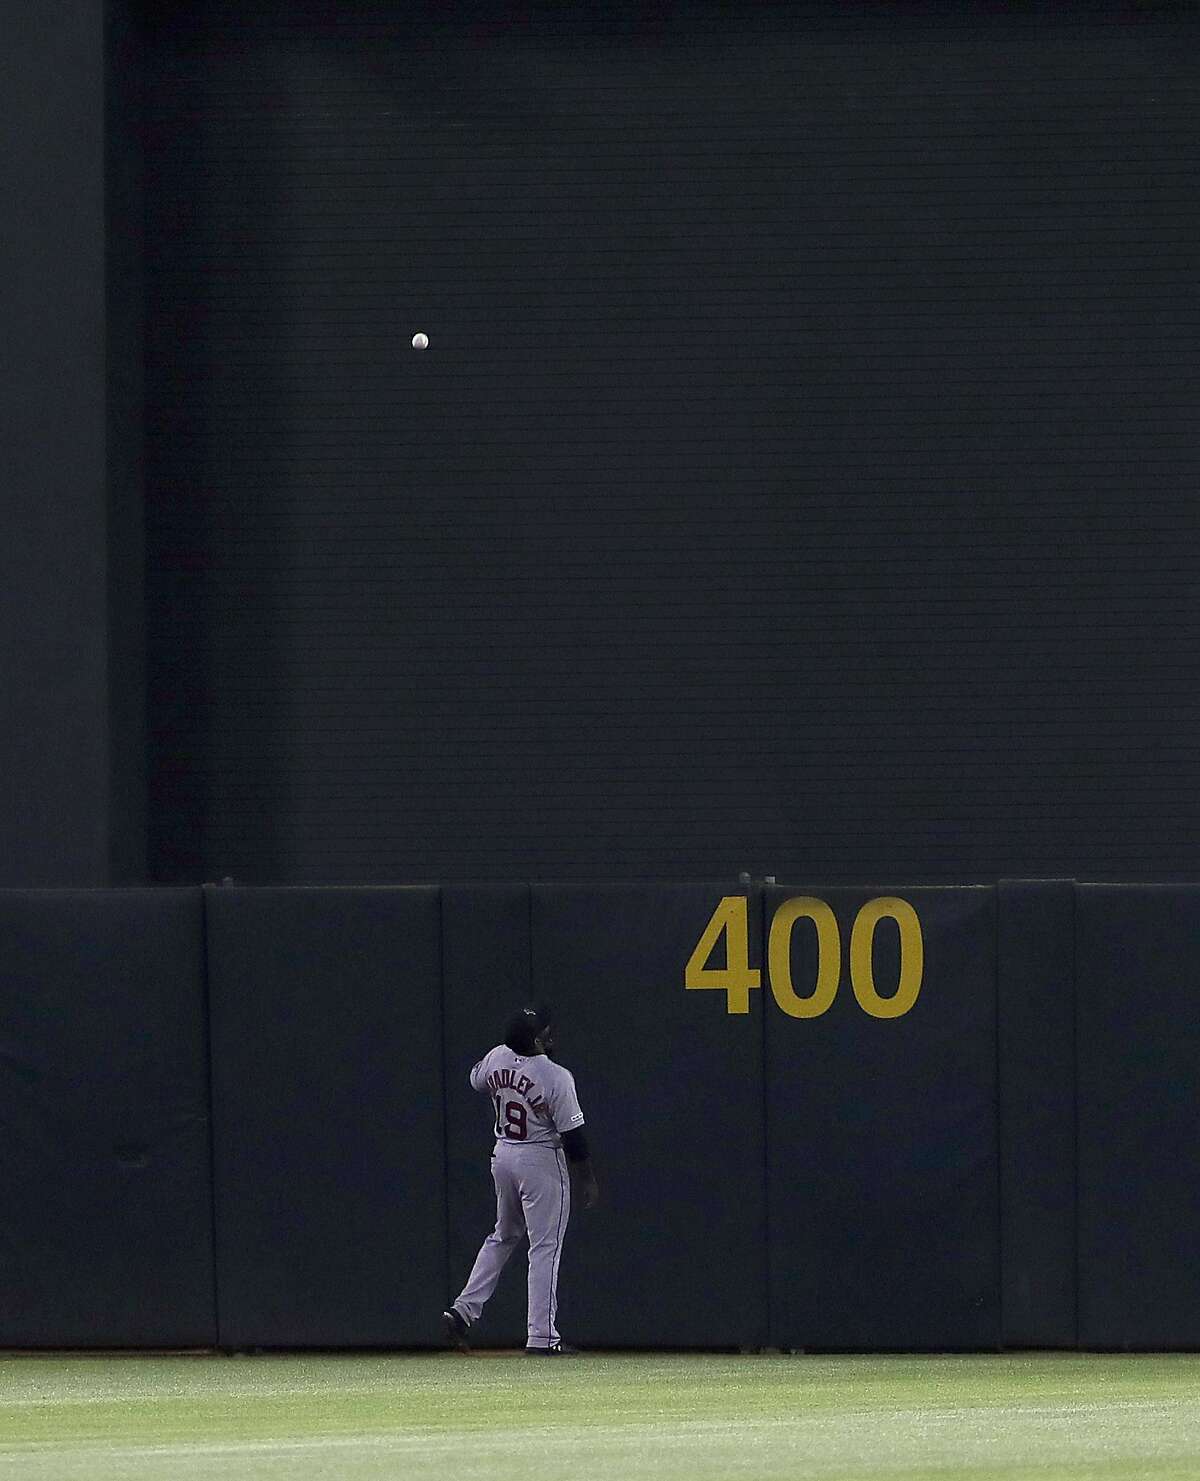 Boston Red Sox center fielder Jackie Bradley Jr. (19) watches a two-run home run hit by Oakland Athletics' Ramon Laureano during the fourth inning of a baseball game in Oakland, Calif., Wednesday, April 3, 2019. (AP Photo/Jeff Chiu)